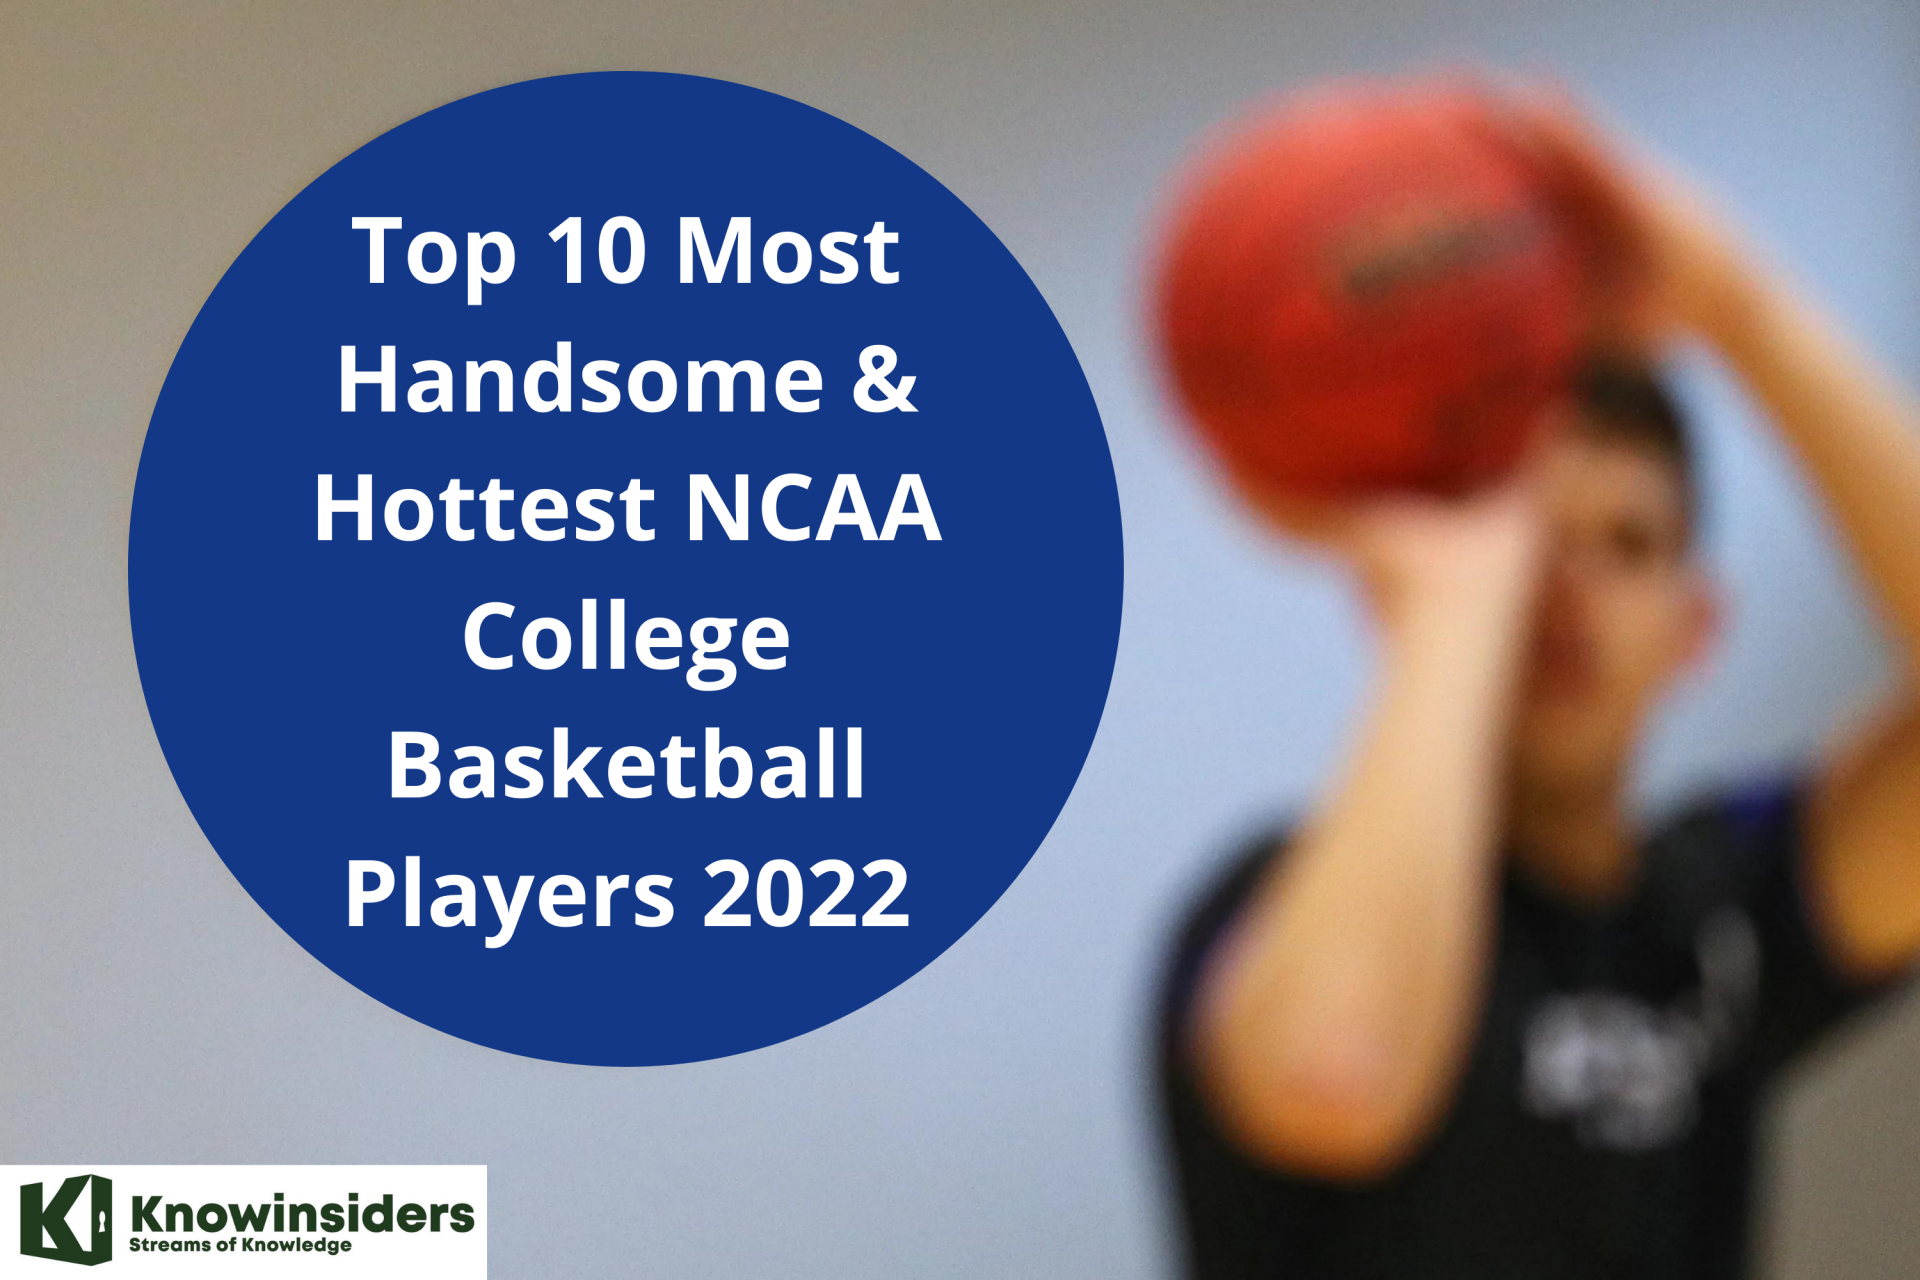 Top 10 Most Handsome & Hottest NCAA College Basketball Players 2022